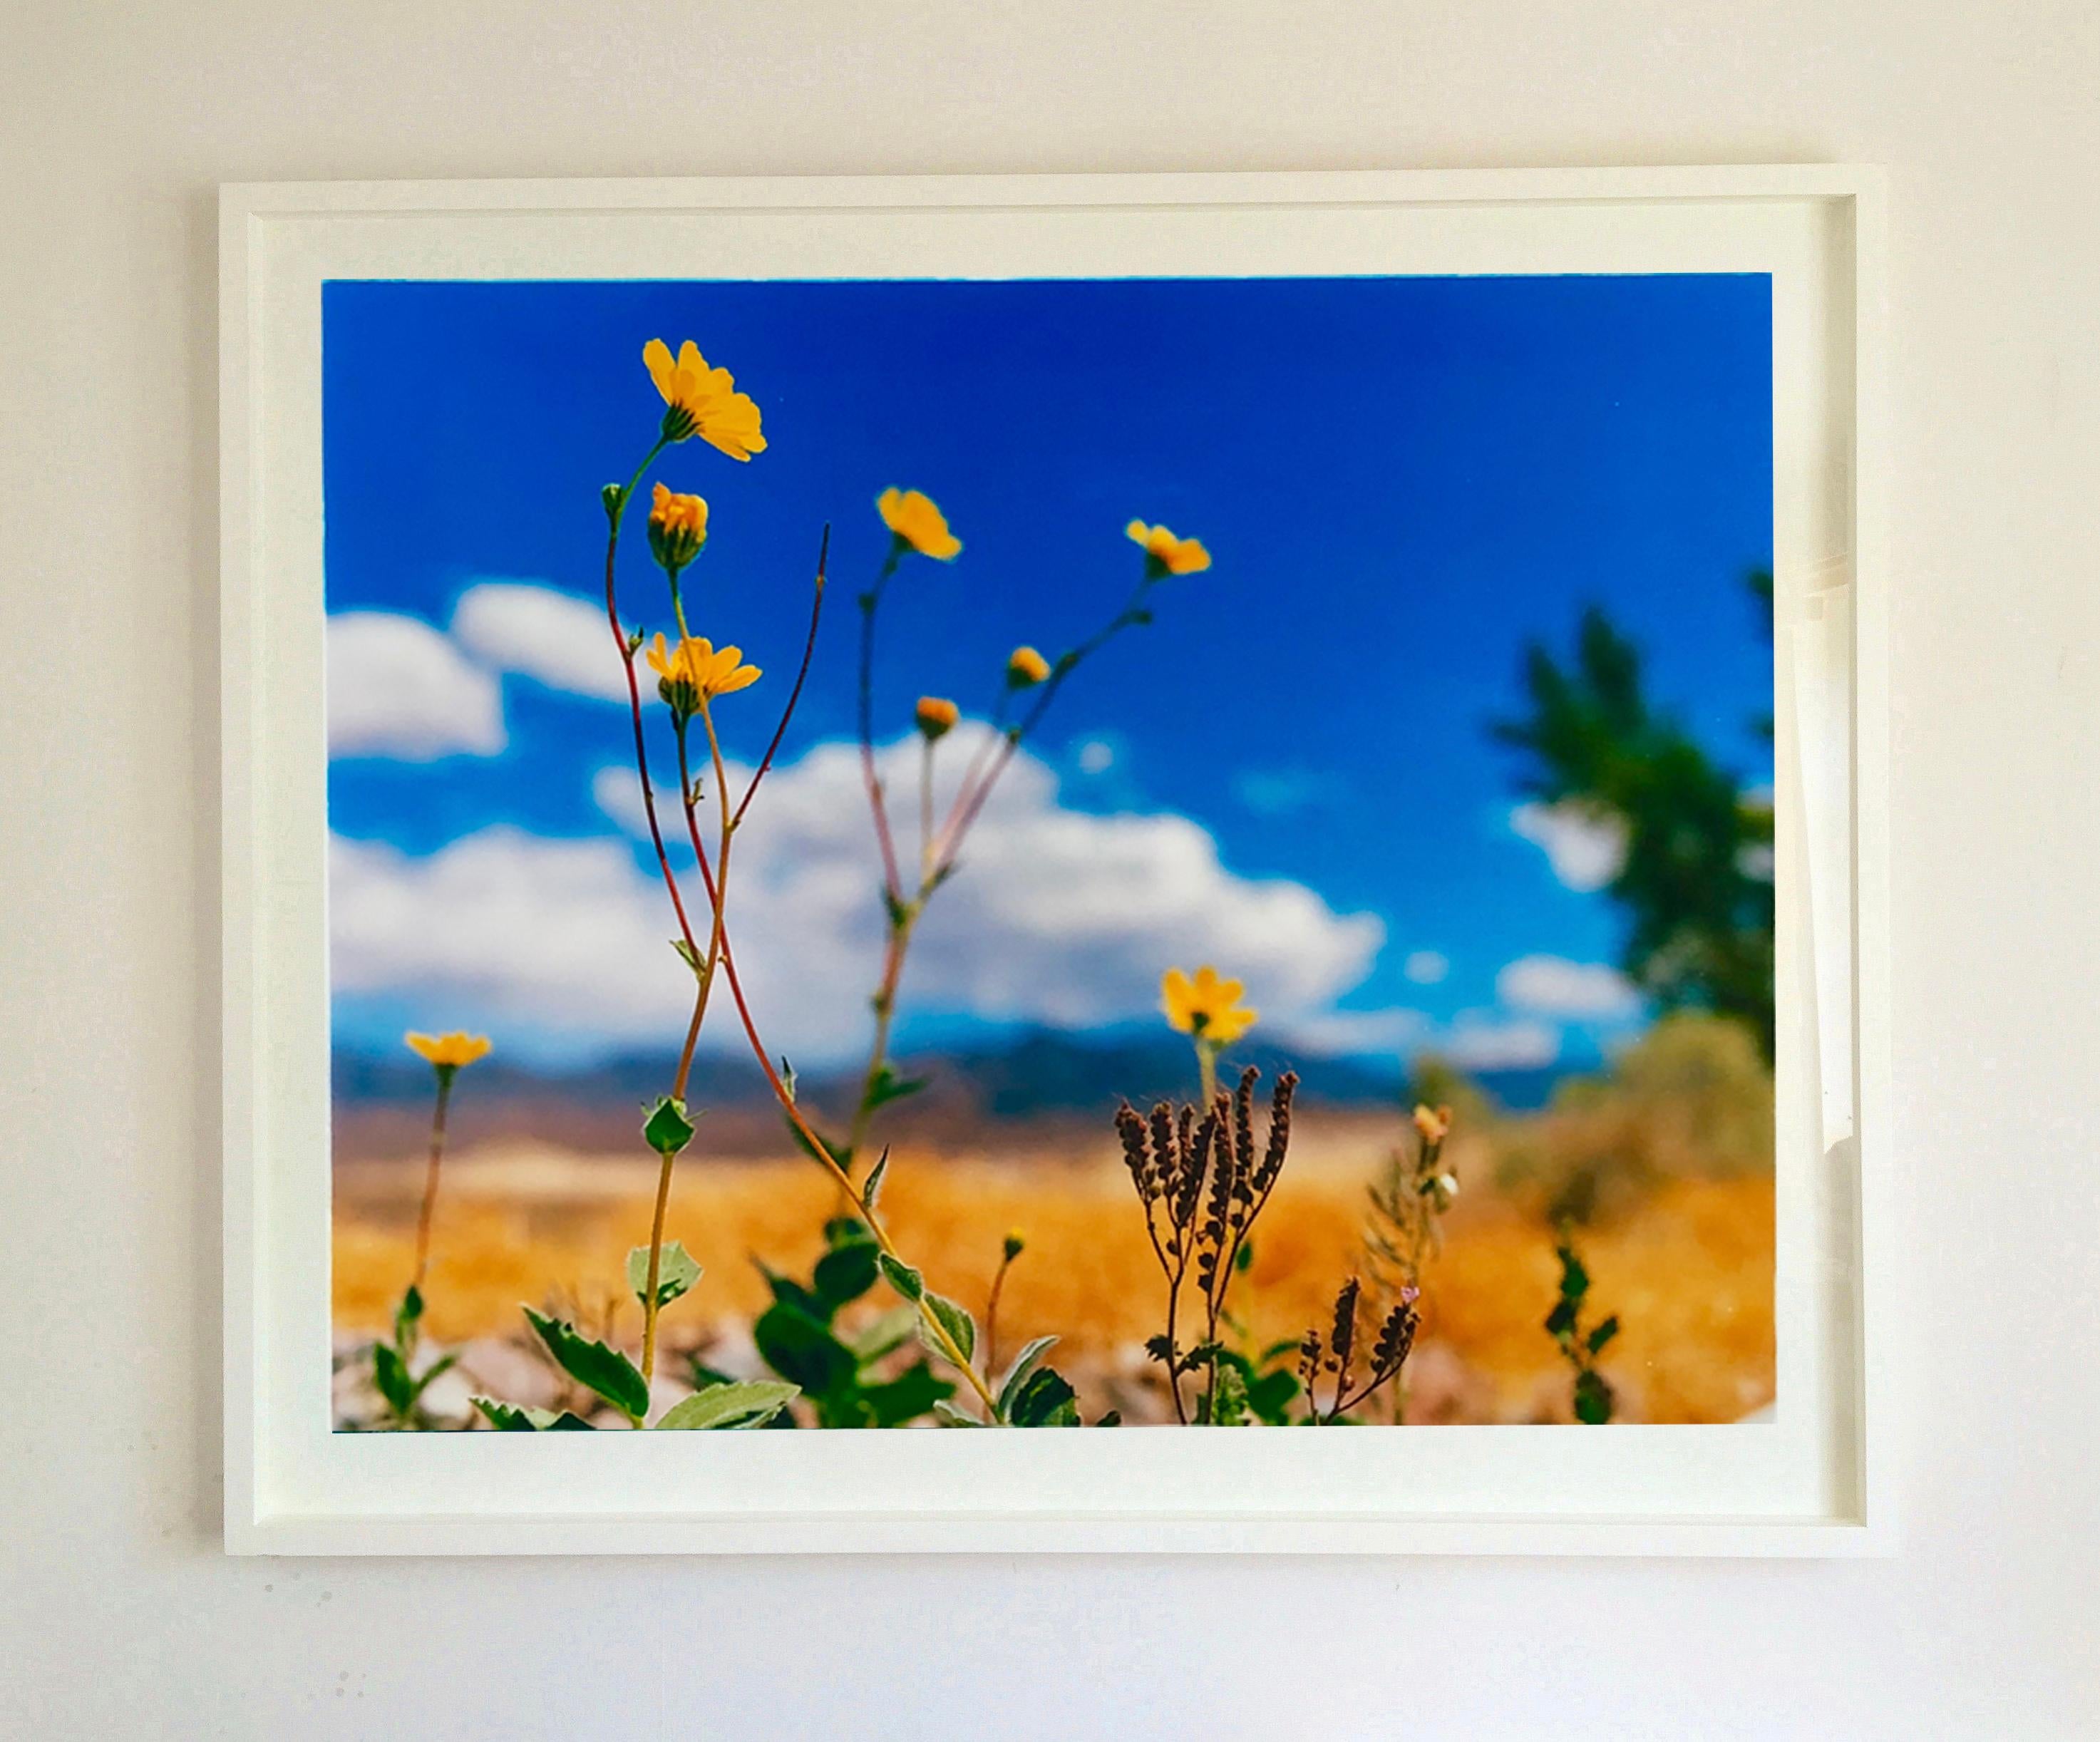 'Hell's Gate', part of Richard Heeps 'Dream in Colour' Series, this beautiful bright capture of the desert flower was taken at the gateway to Death Valley shortly after rainfall.

This artwork is a limited edition of 25, gloss photographic print.